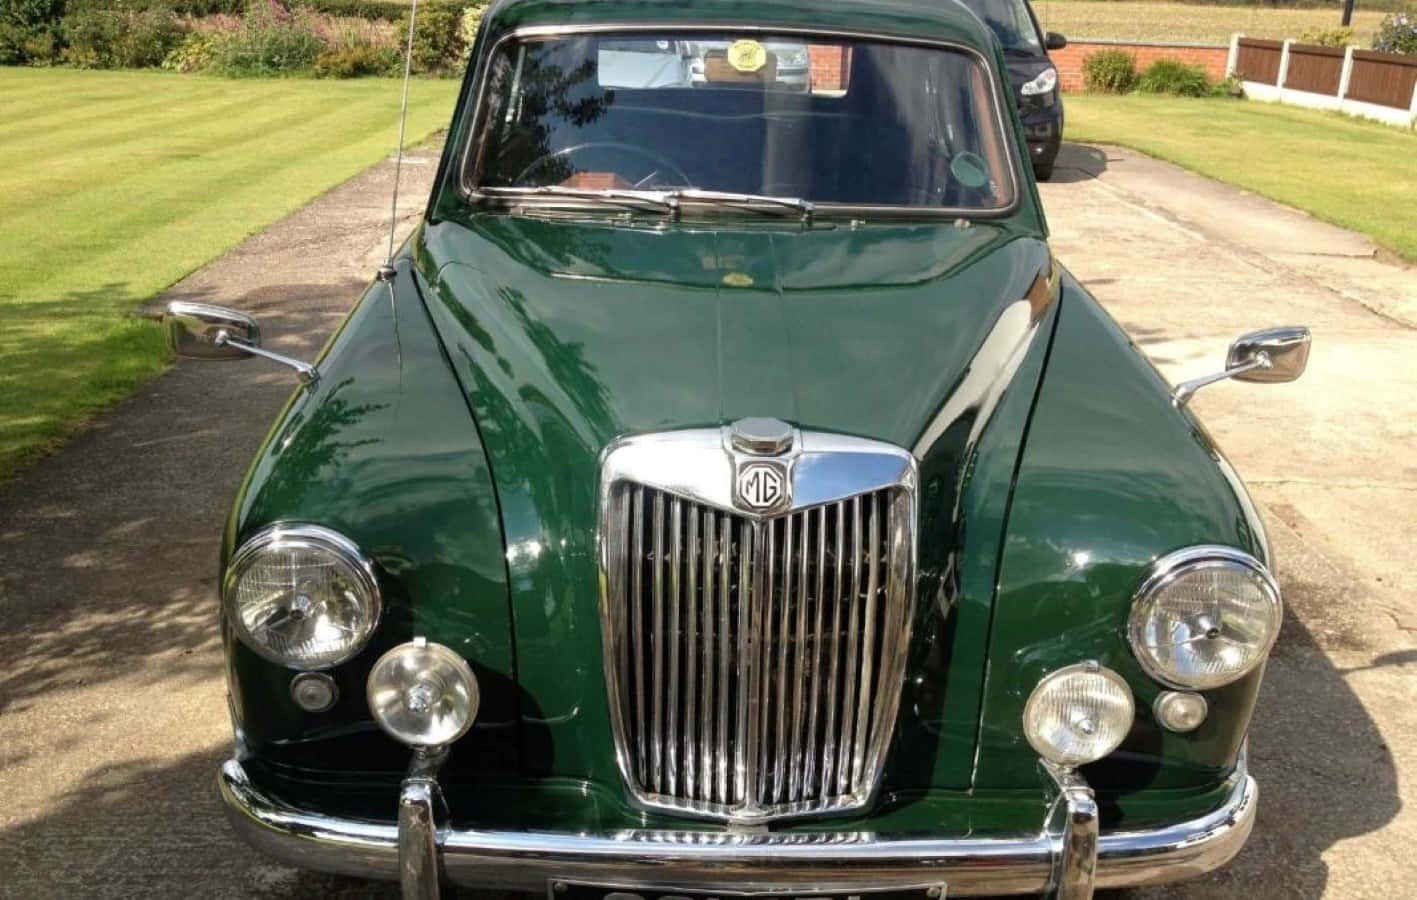 Classic Mg Magnette On A Country Road Wallpaper